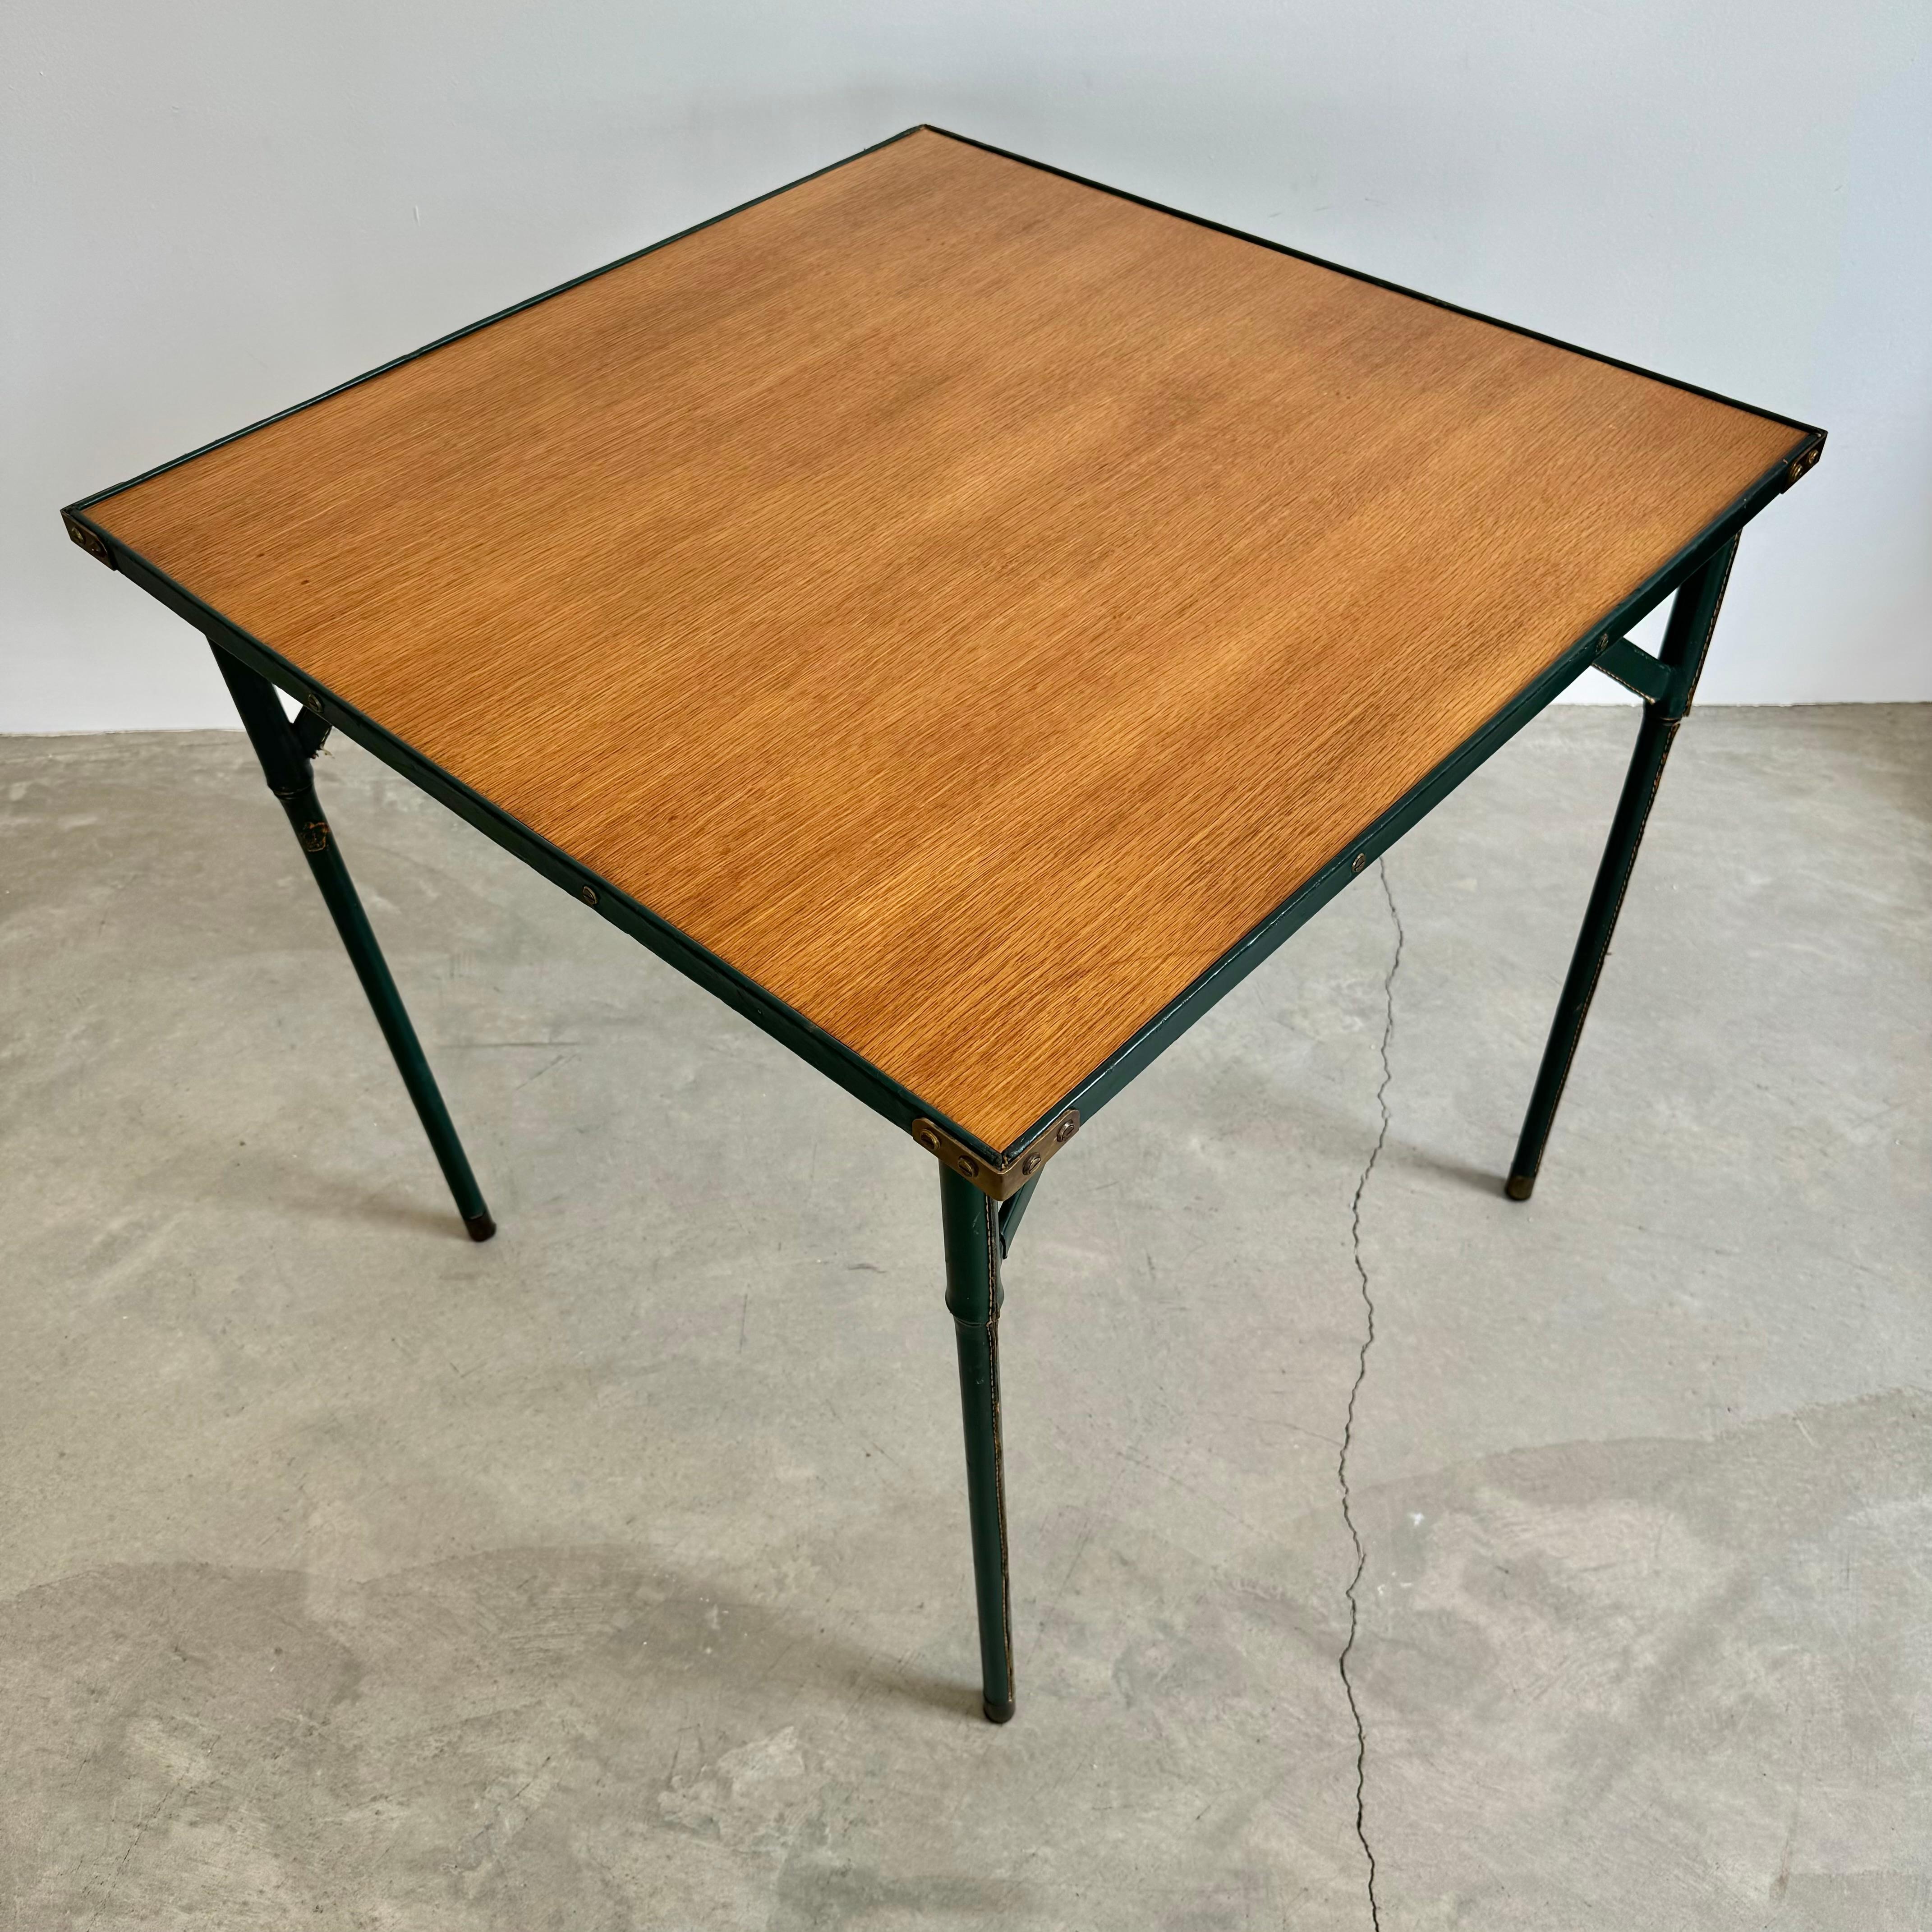 Stunning leather table by French designer Jacques Adnet. Green leather wrapped bamboo style legs with leather wrapped top and corners. Original wood tabletop. Brass detailing throughout. Signature Adnet contrast stitching throughout. Great vintage